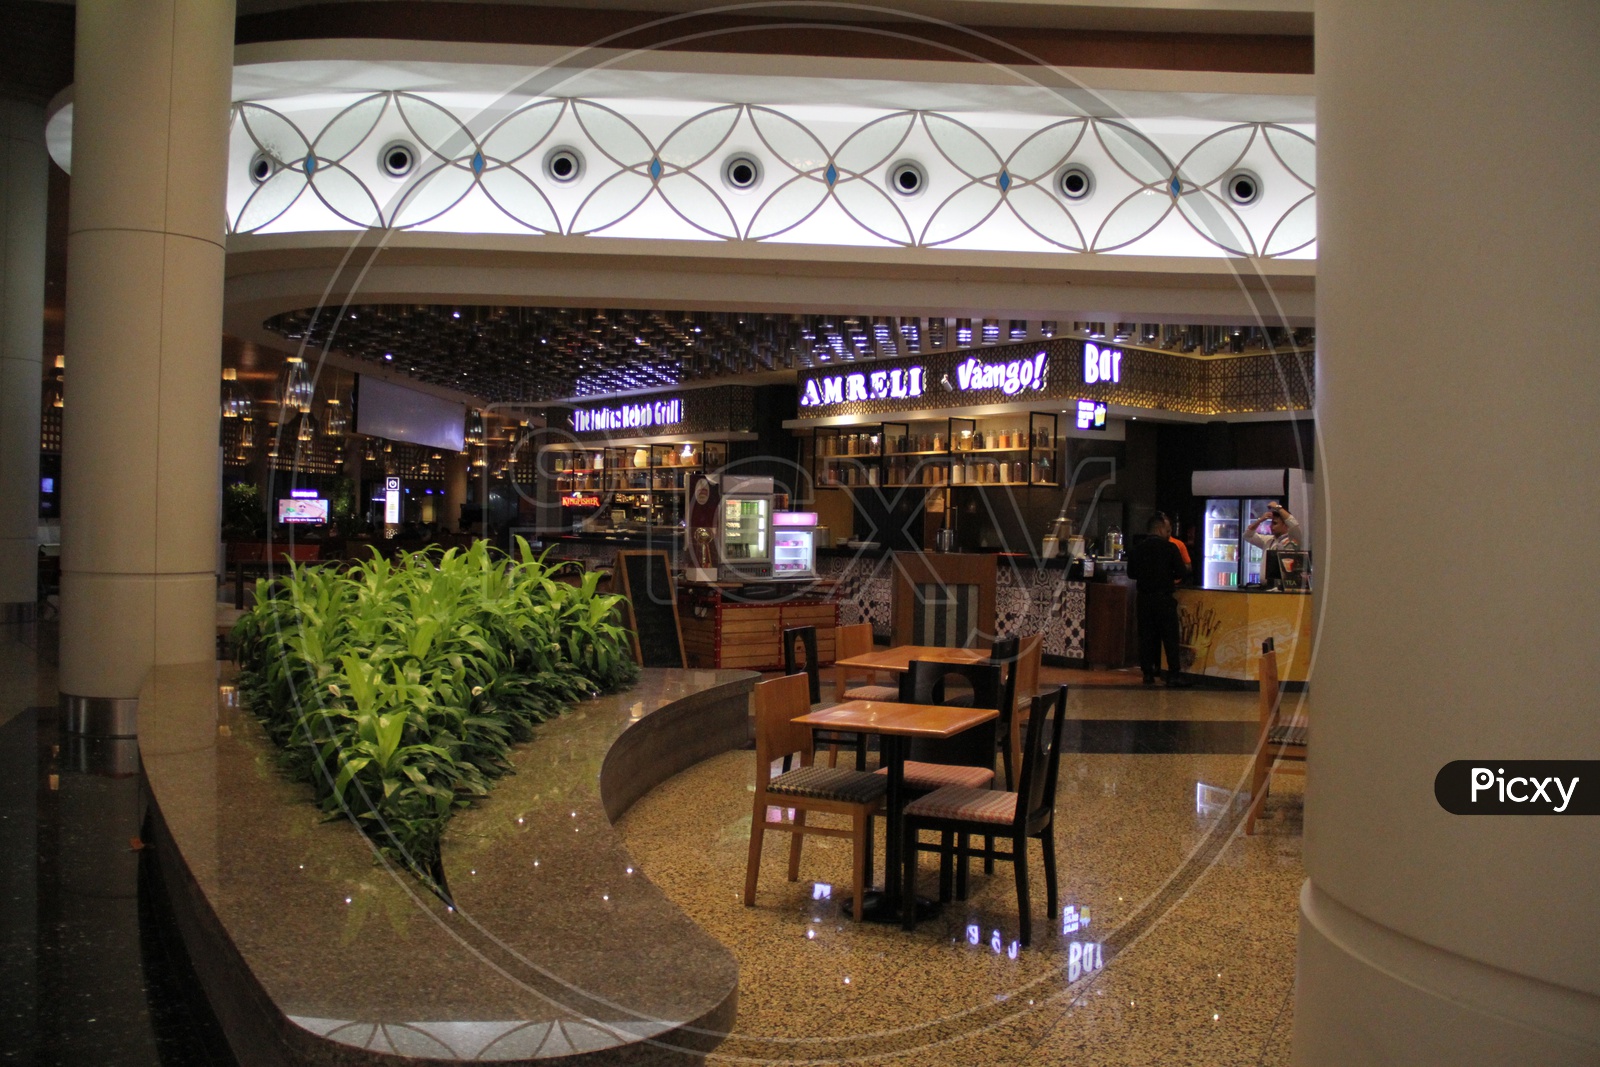 Cafes And restaurants In a Shopping Mall With Chairs And Tables